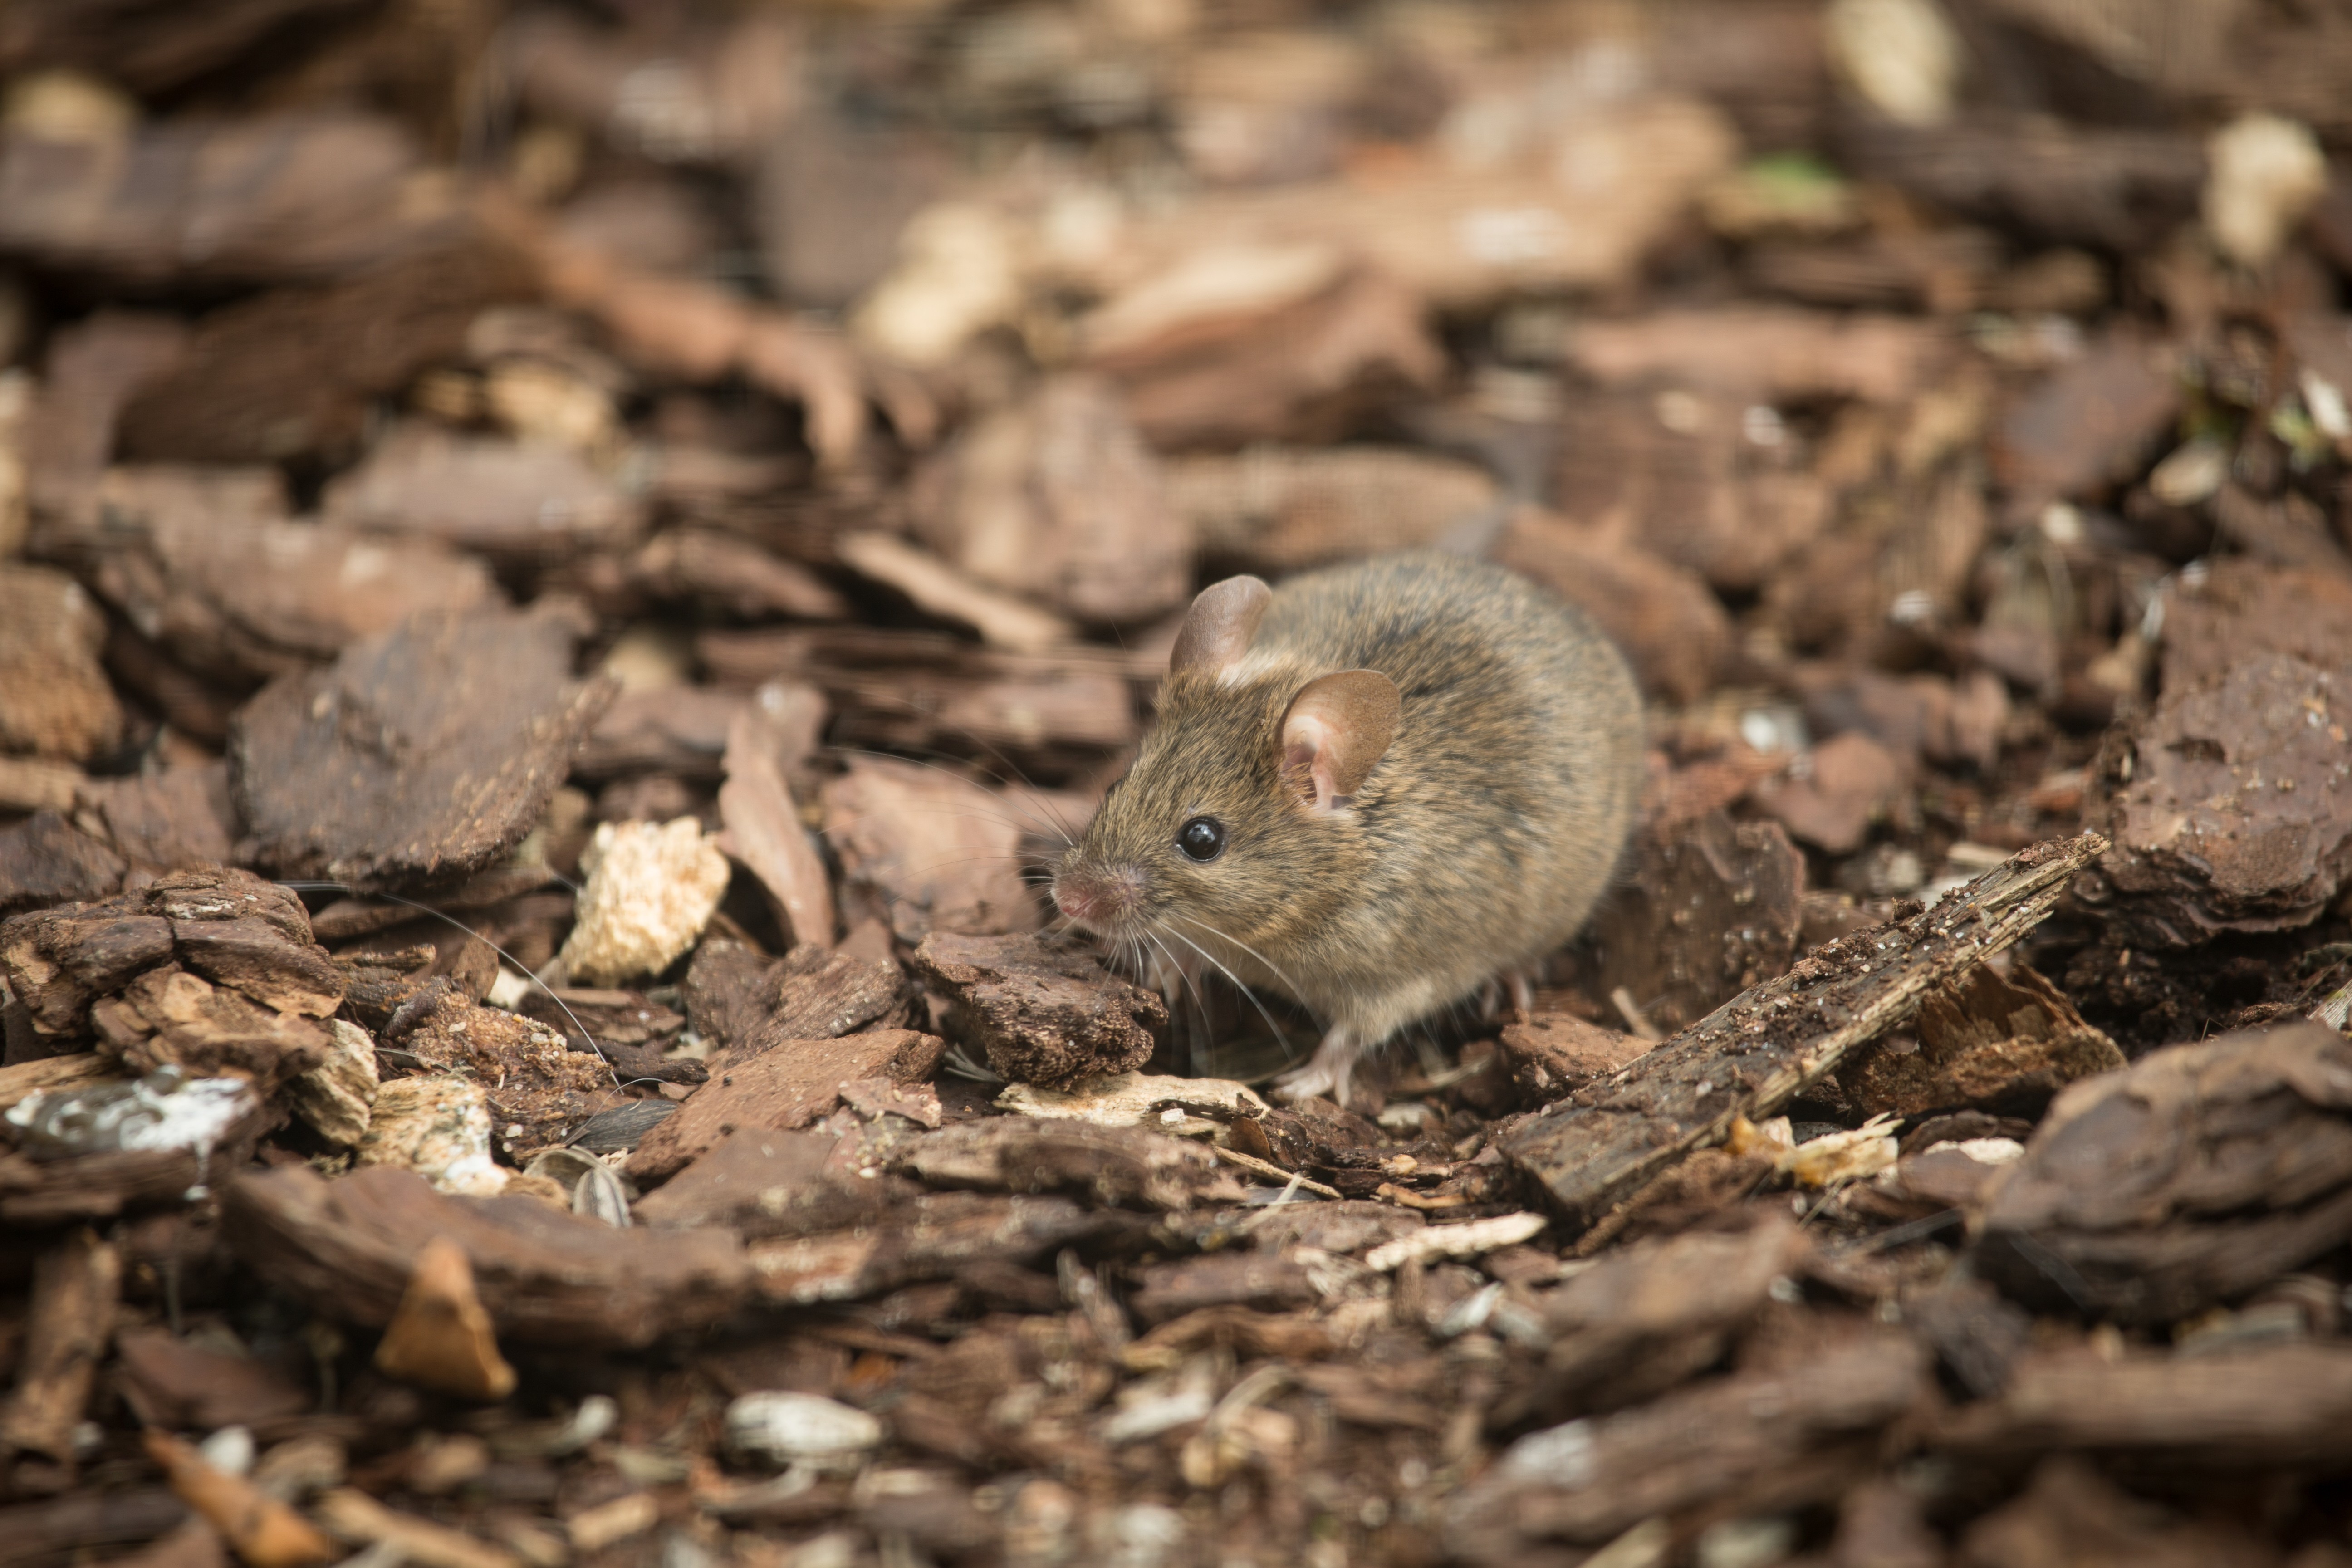 General 5184x3456 mice animals mammals nature closeup outdoors on the ground